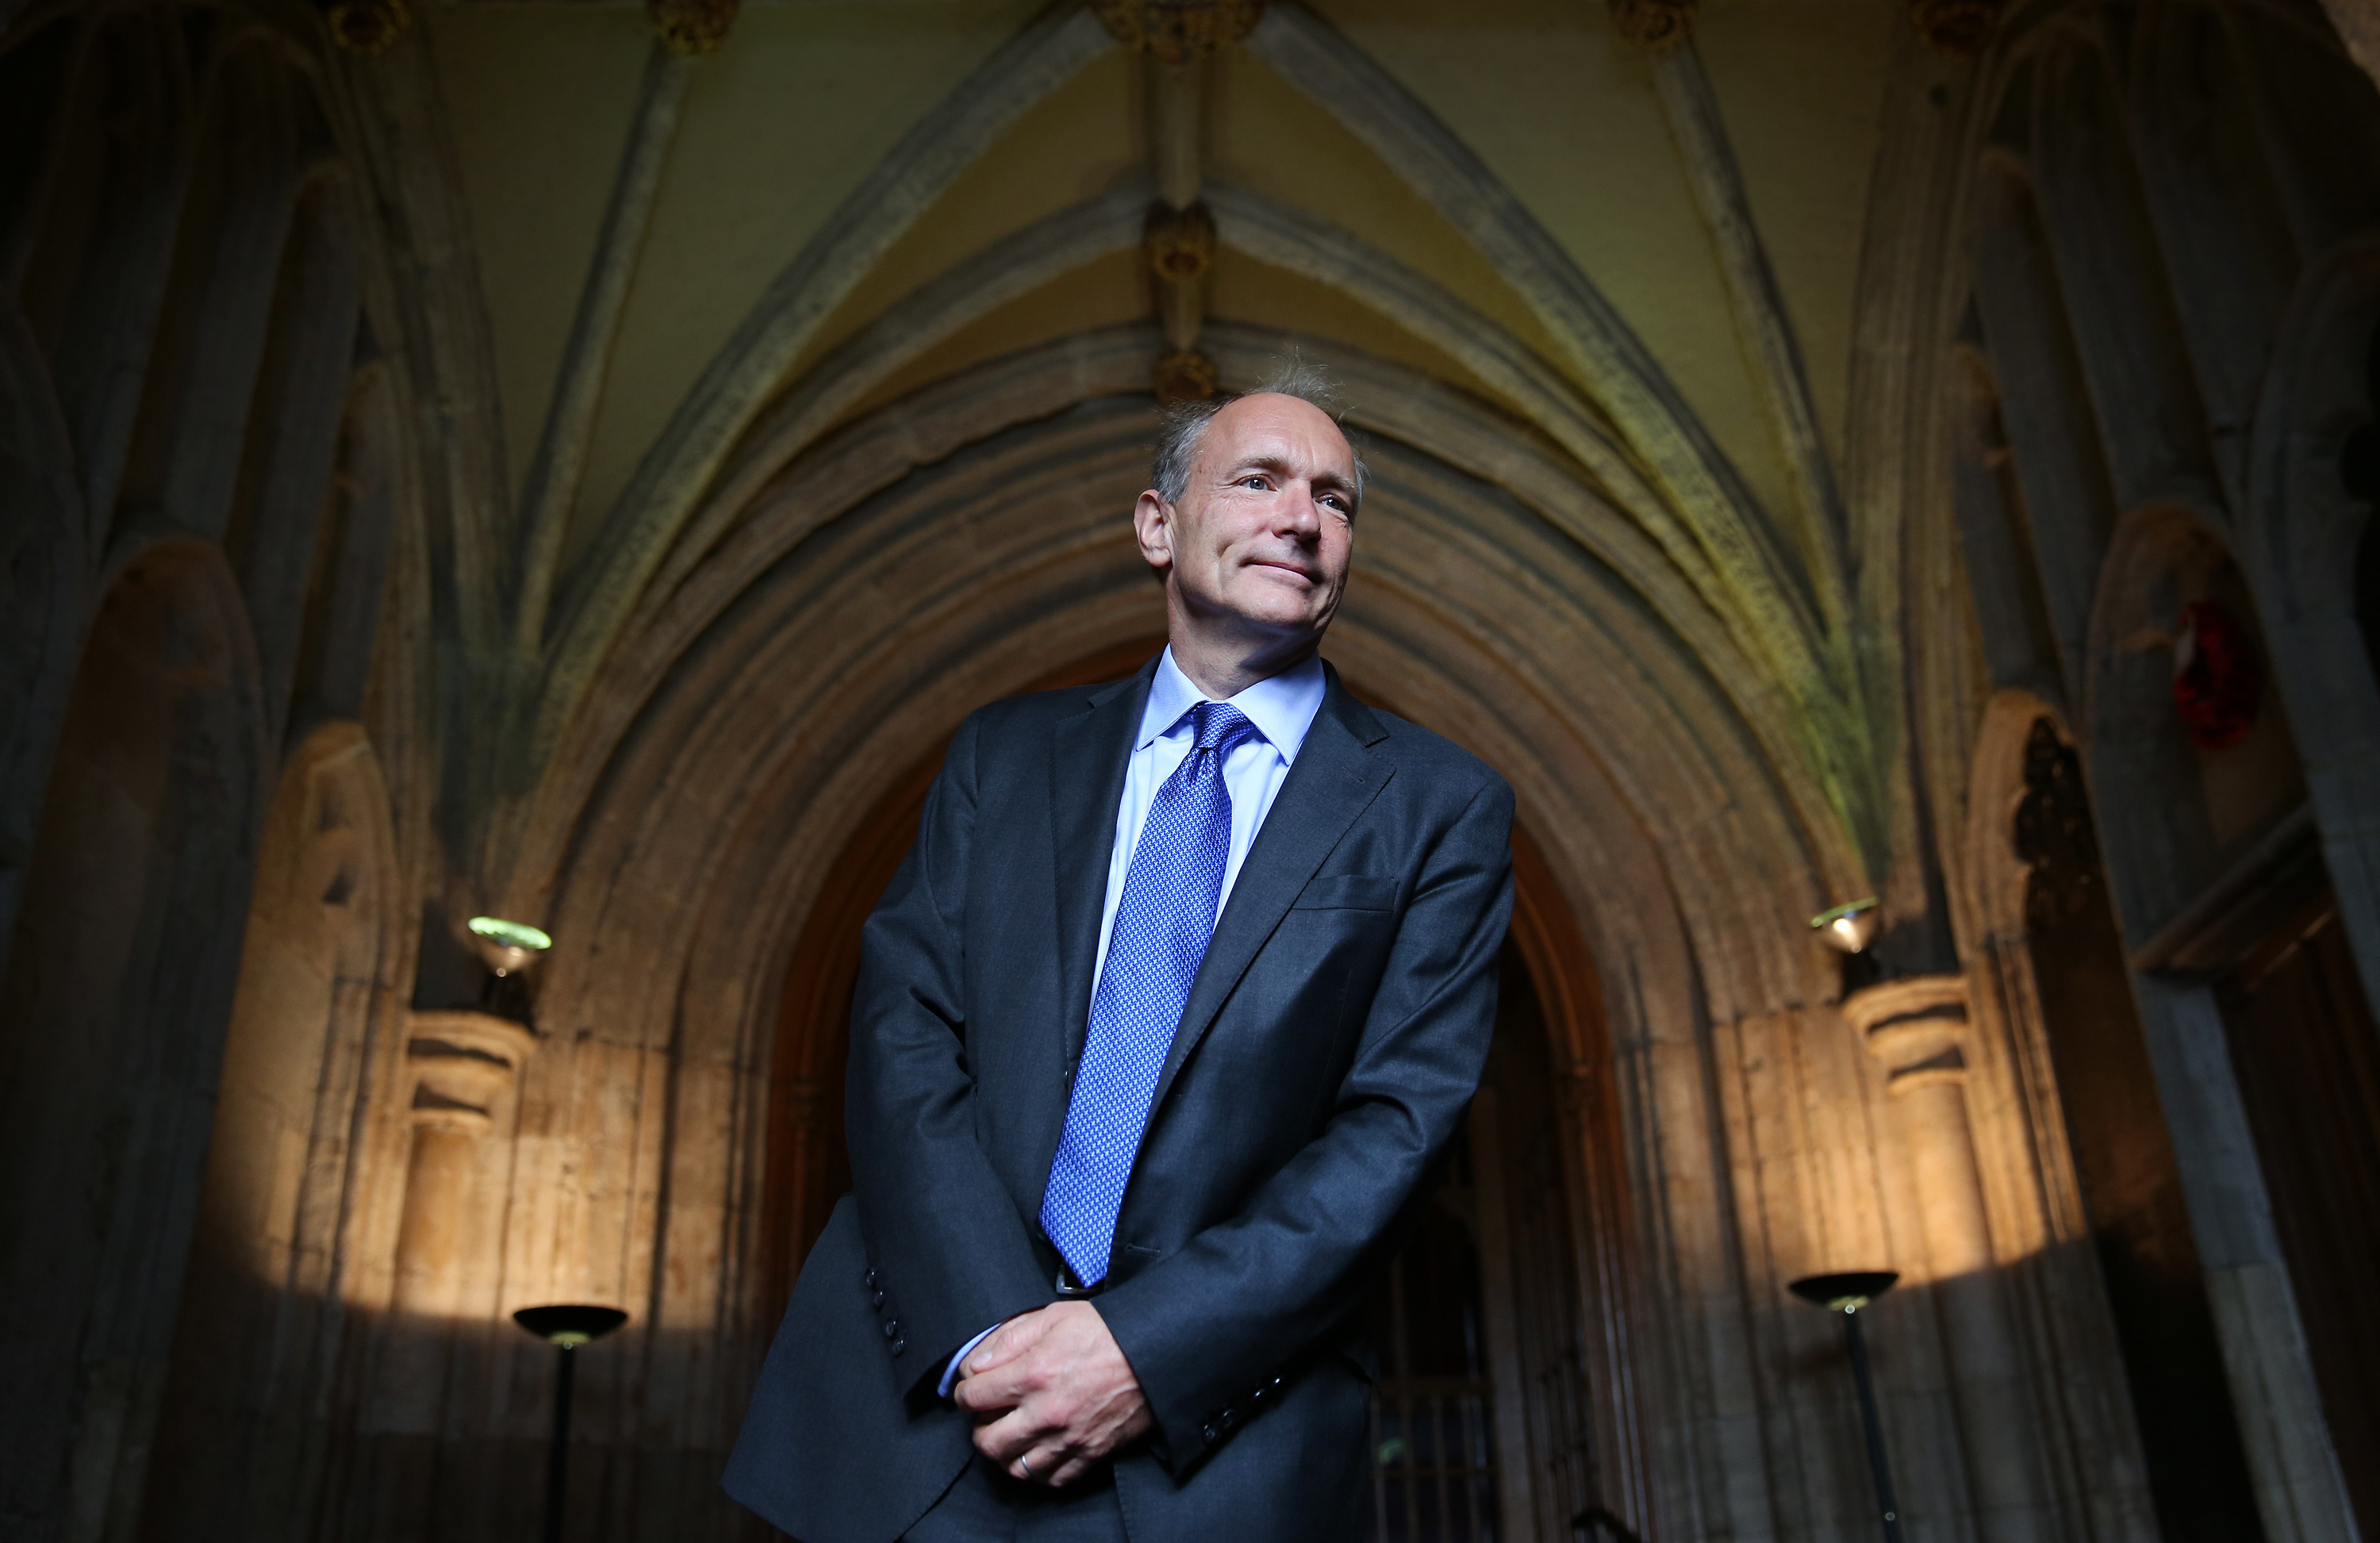 Sir Tim Berners-Lee  inventor of the World Wide Web arrives at Guildhall to receive an Honorary Freedom of the City of London award on September 24, 2014 in London, England. (Peter Macdiarmid&mdash;Getty Images)